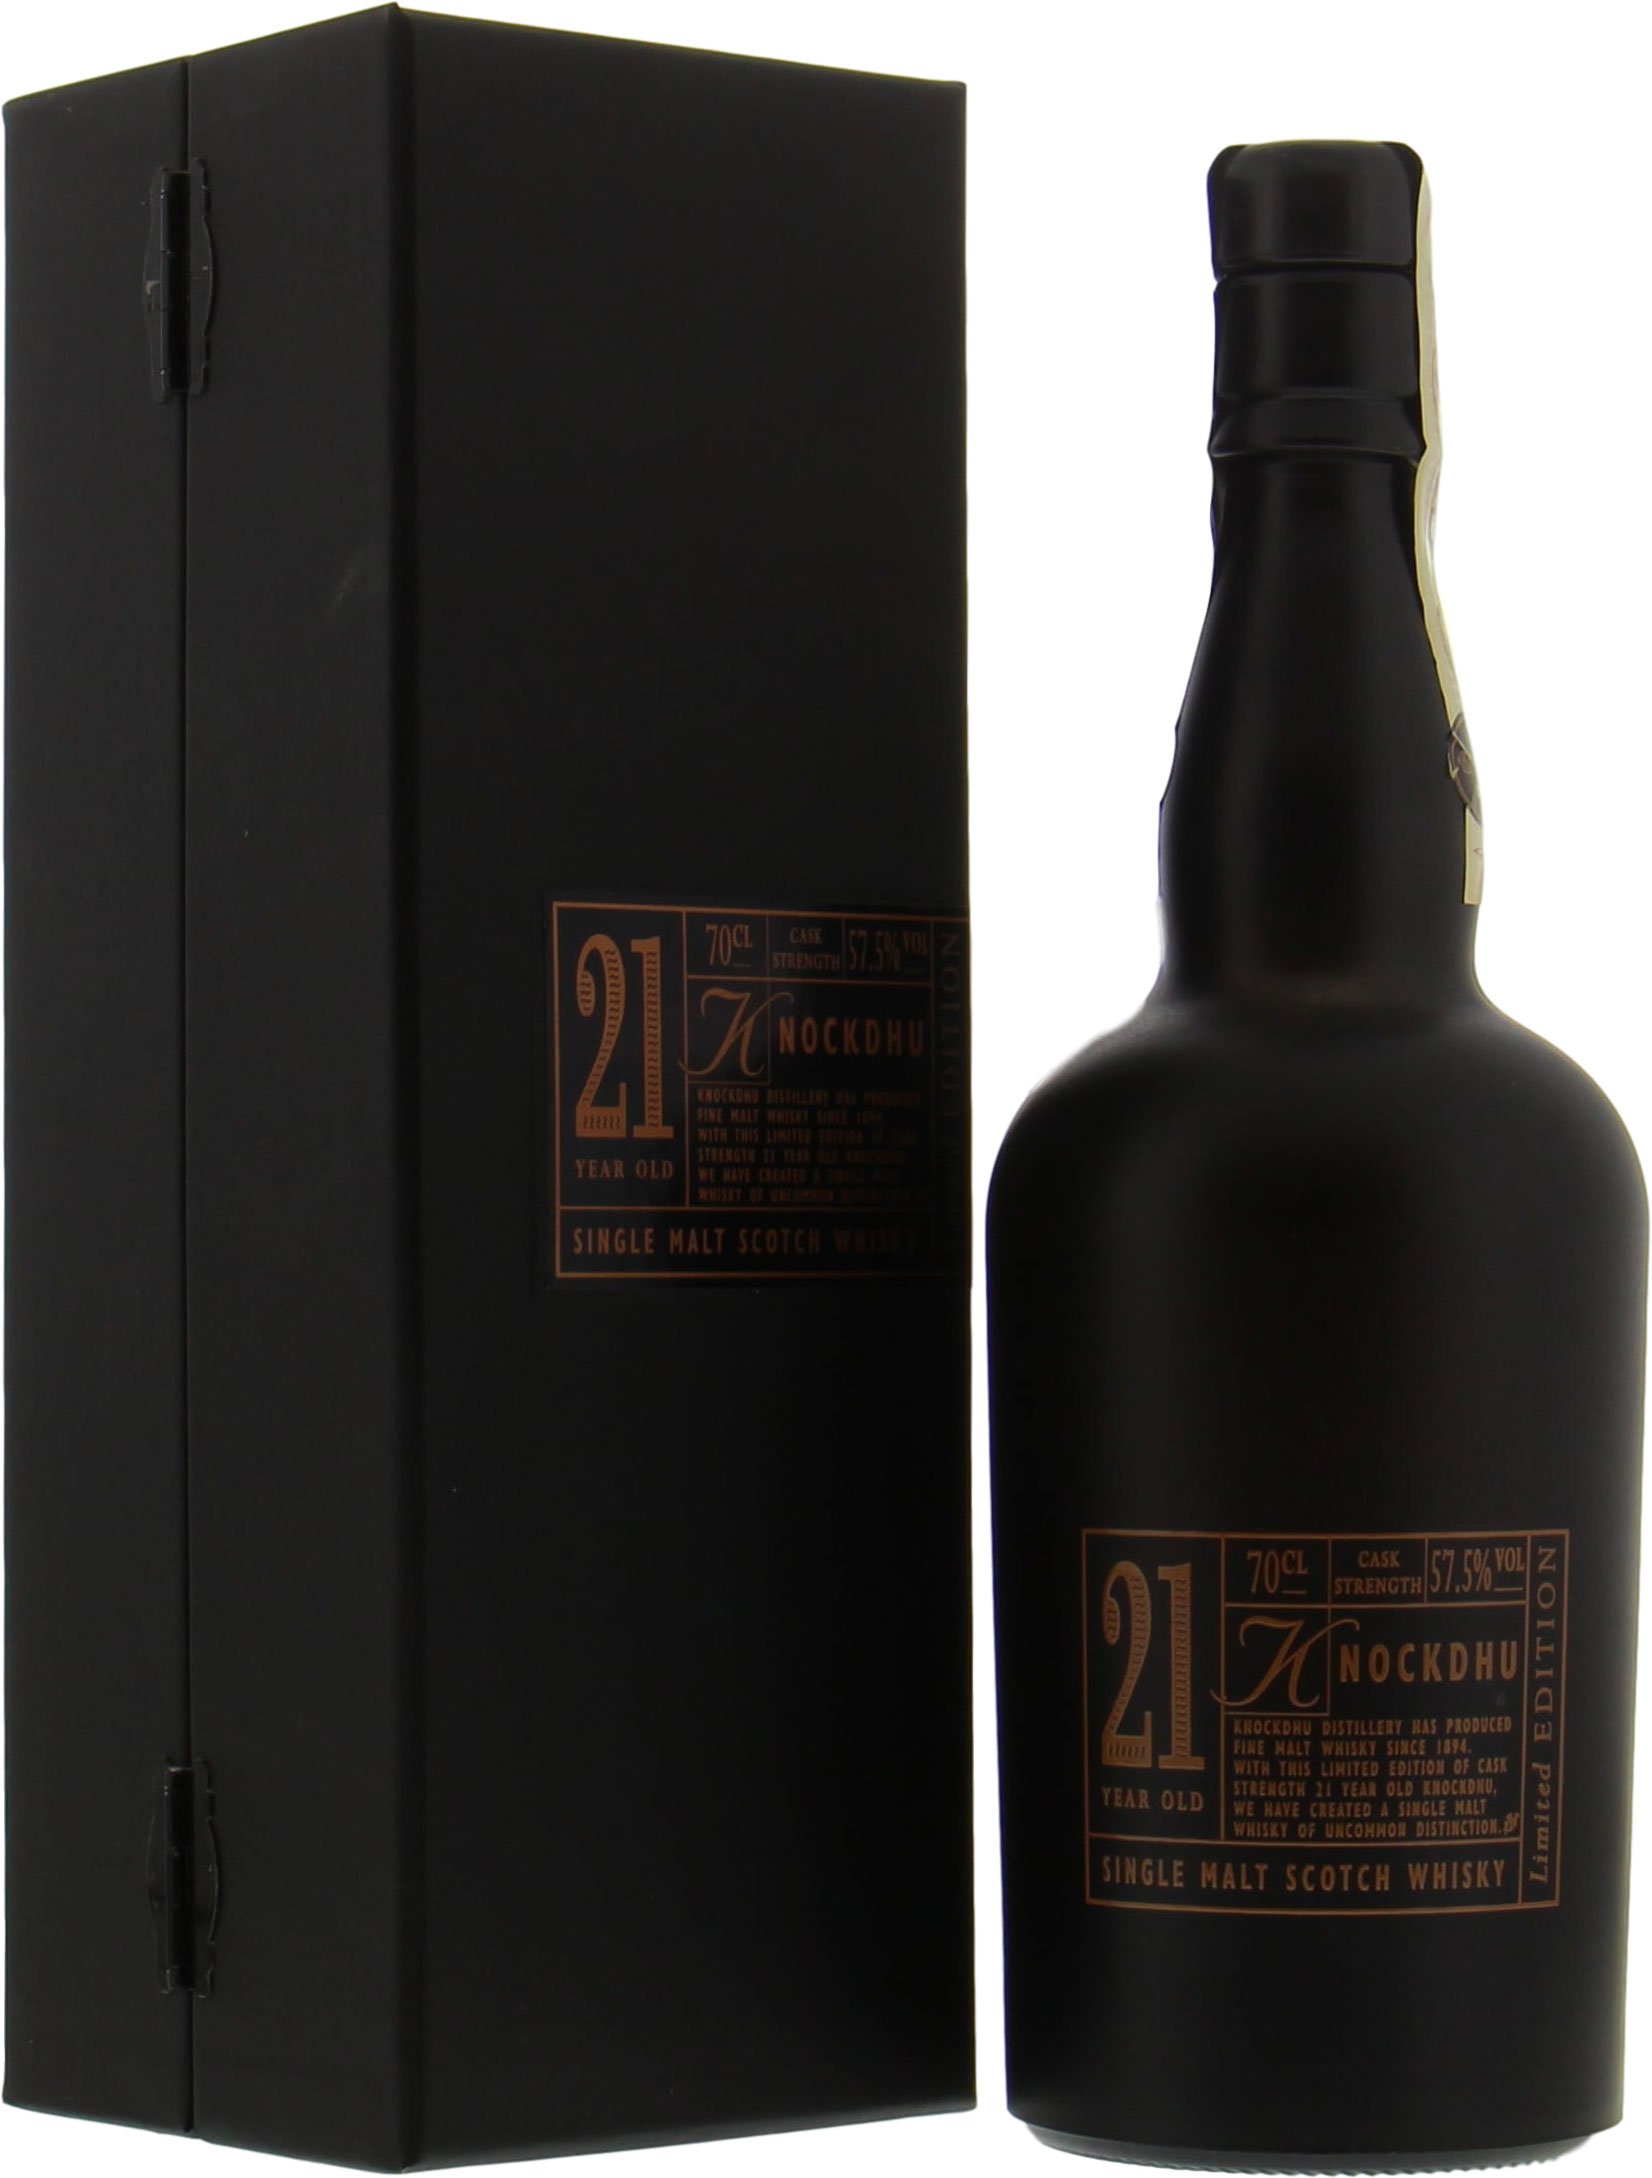 Knockdhu - 21 Years Old Limited Edition 57.5% NV In Original Container